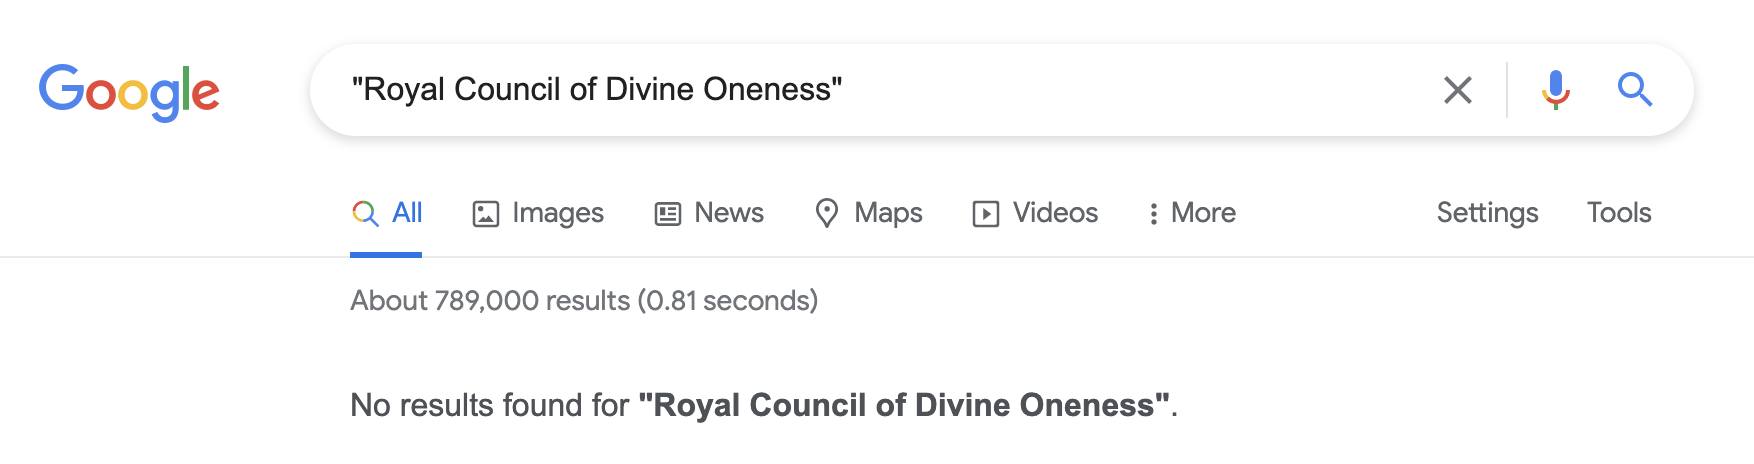 Royal Council of Divine Oneness - search result